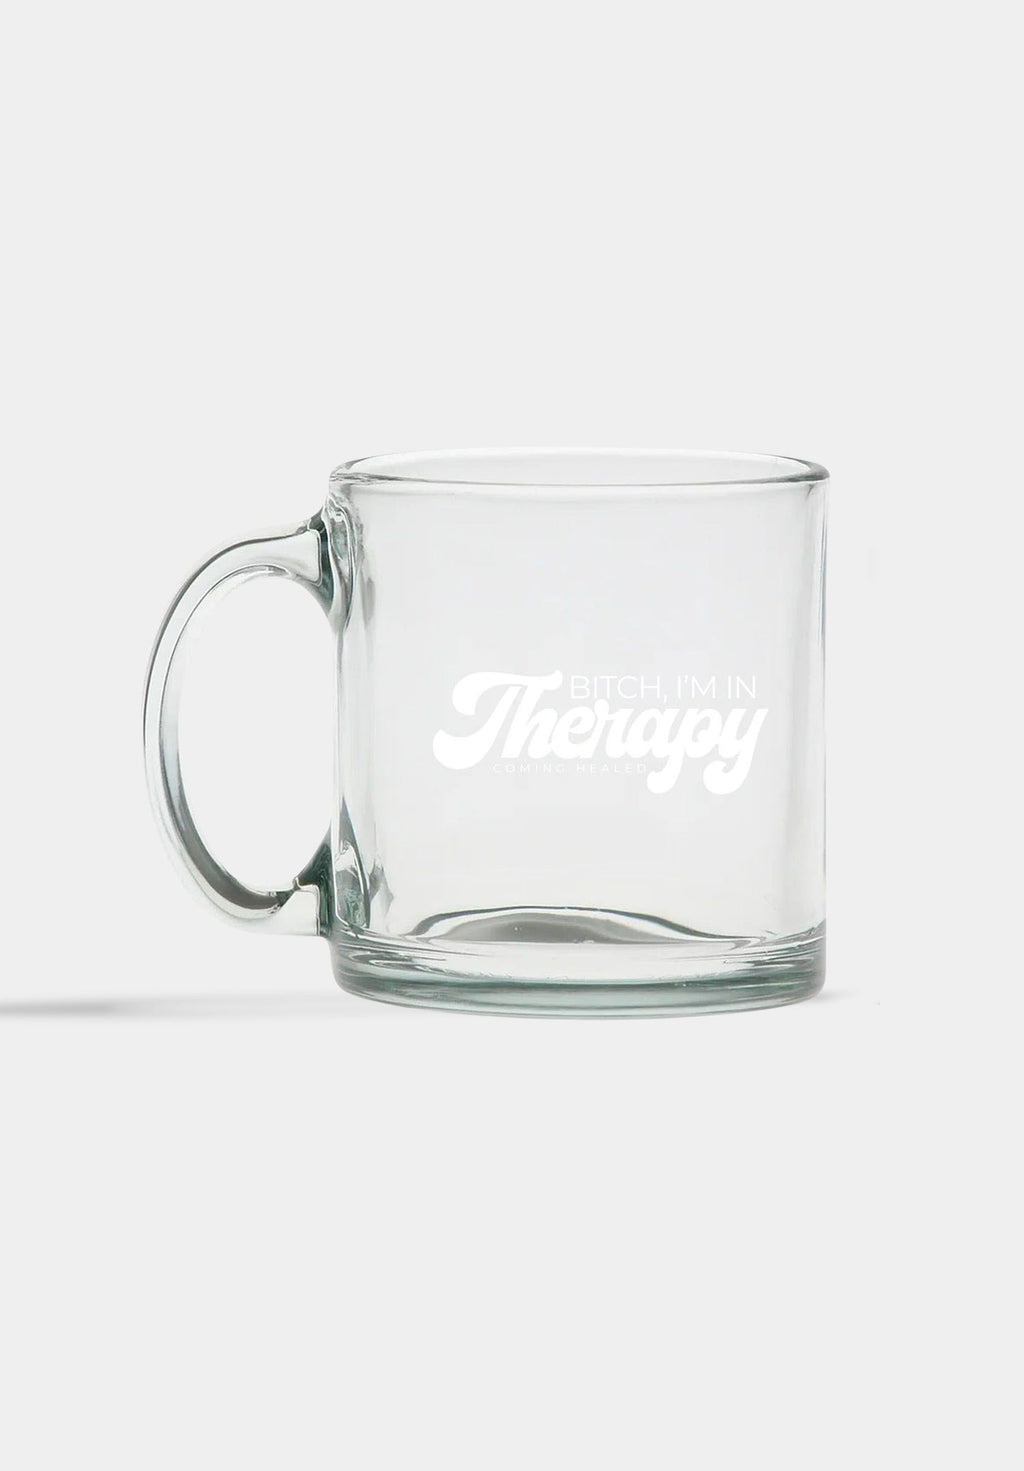 BITCH, I'M IN THERAPY; COMING HEALED Clear Glass Mug